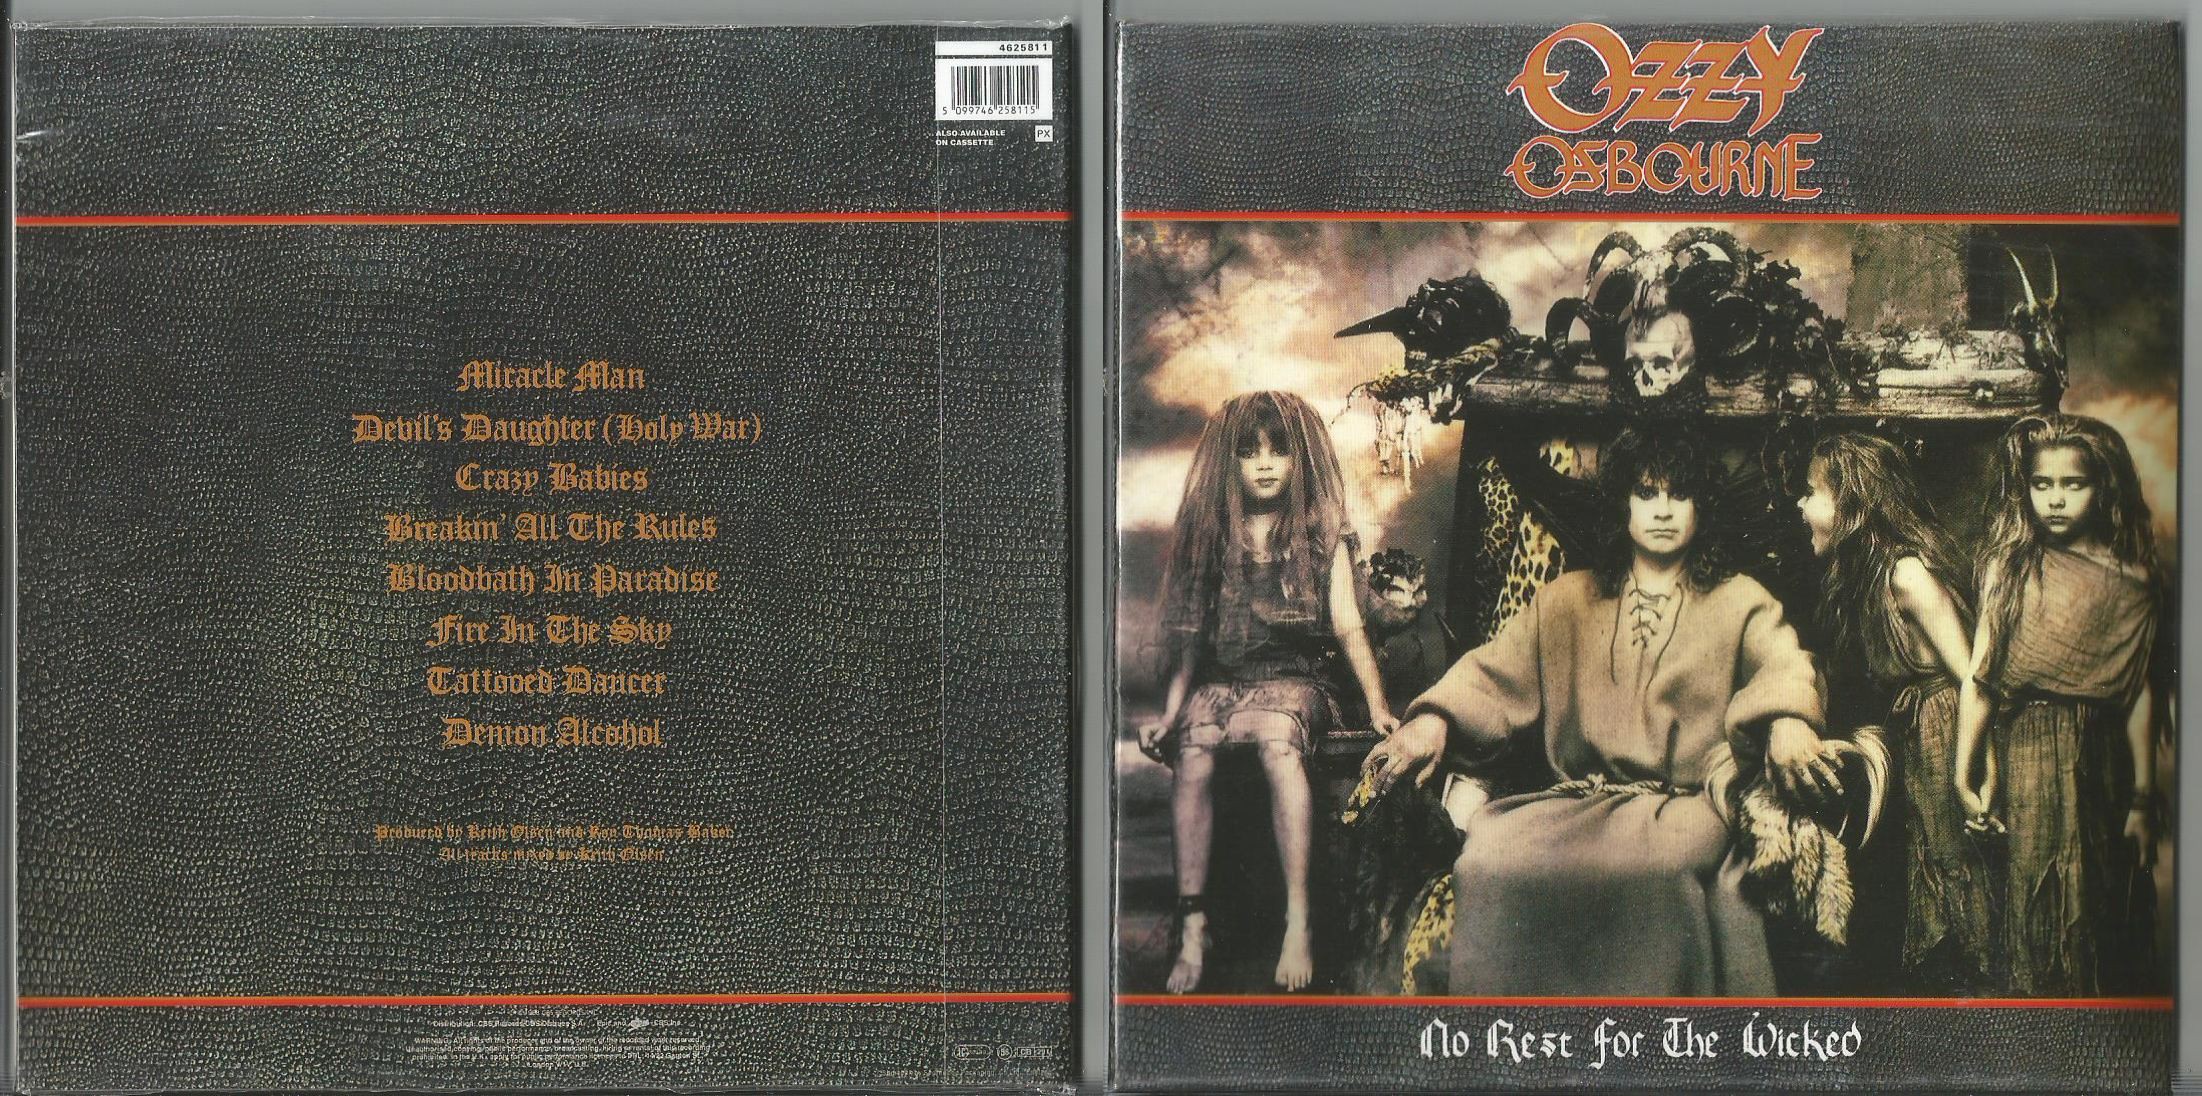 No rest for the wicked ps5. Ozzy Osbourne no rest for the Wicked. Ozzy Osbourne no rest for the Wicked album. Ozzy Osbourne no rest for the Wicked 1988. Ozzy Osbourne no rest for the Wicked обложка.